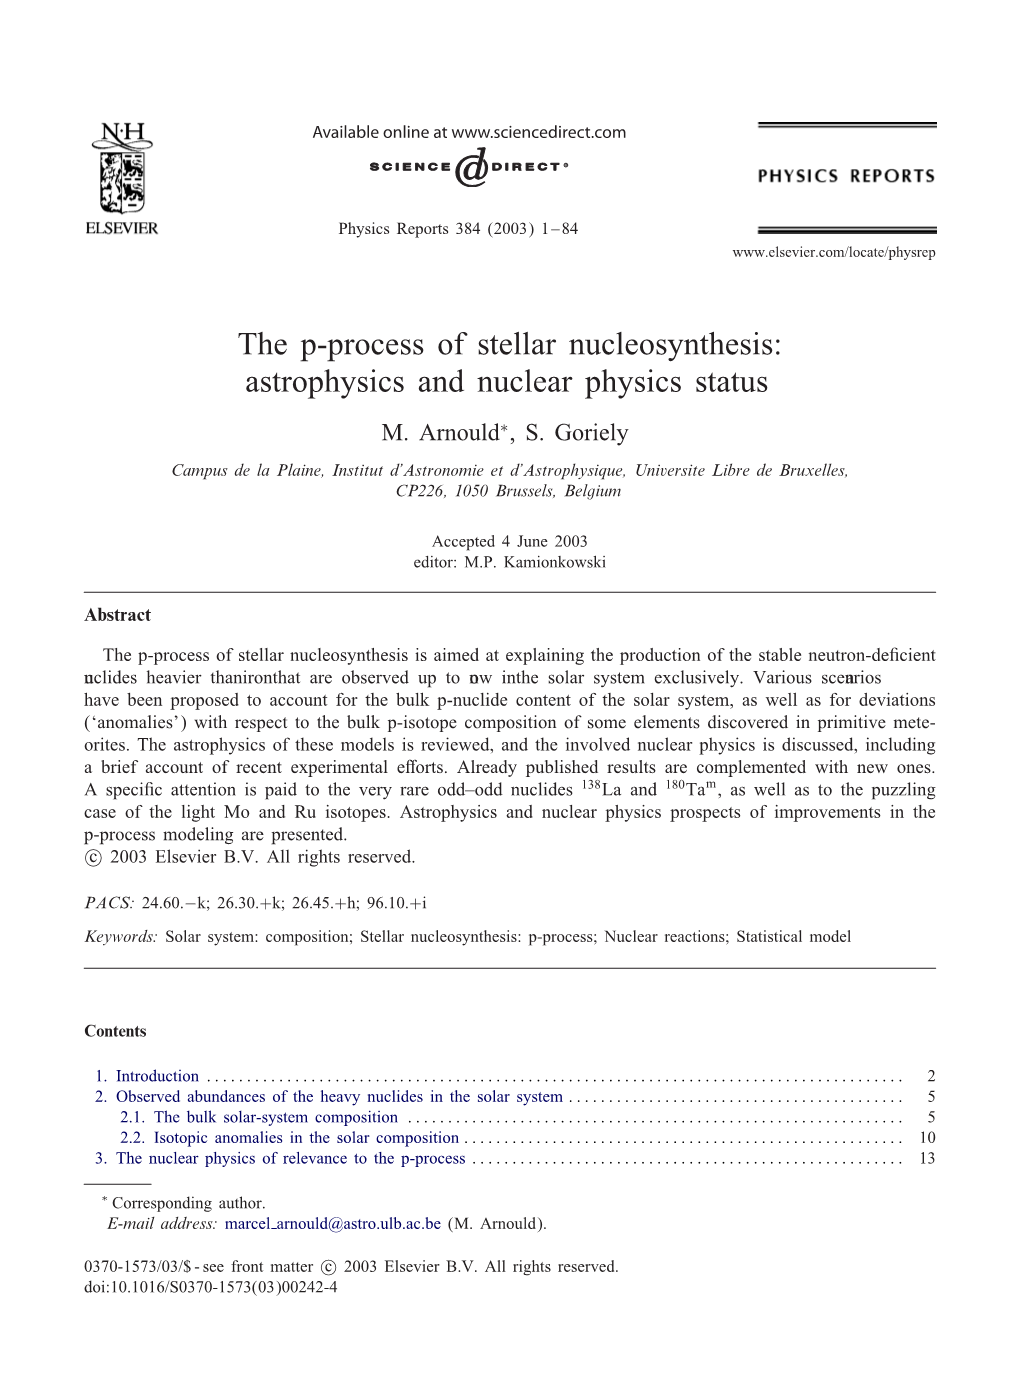 The P-Process of Stellar Nucleosynthesis: Astrophysics and Nuclear Physics Status